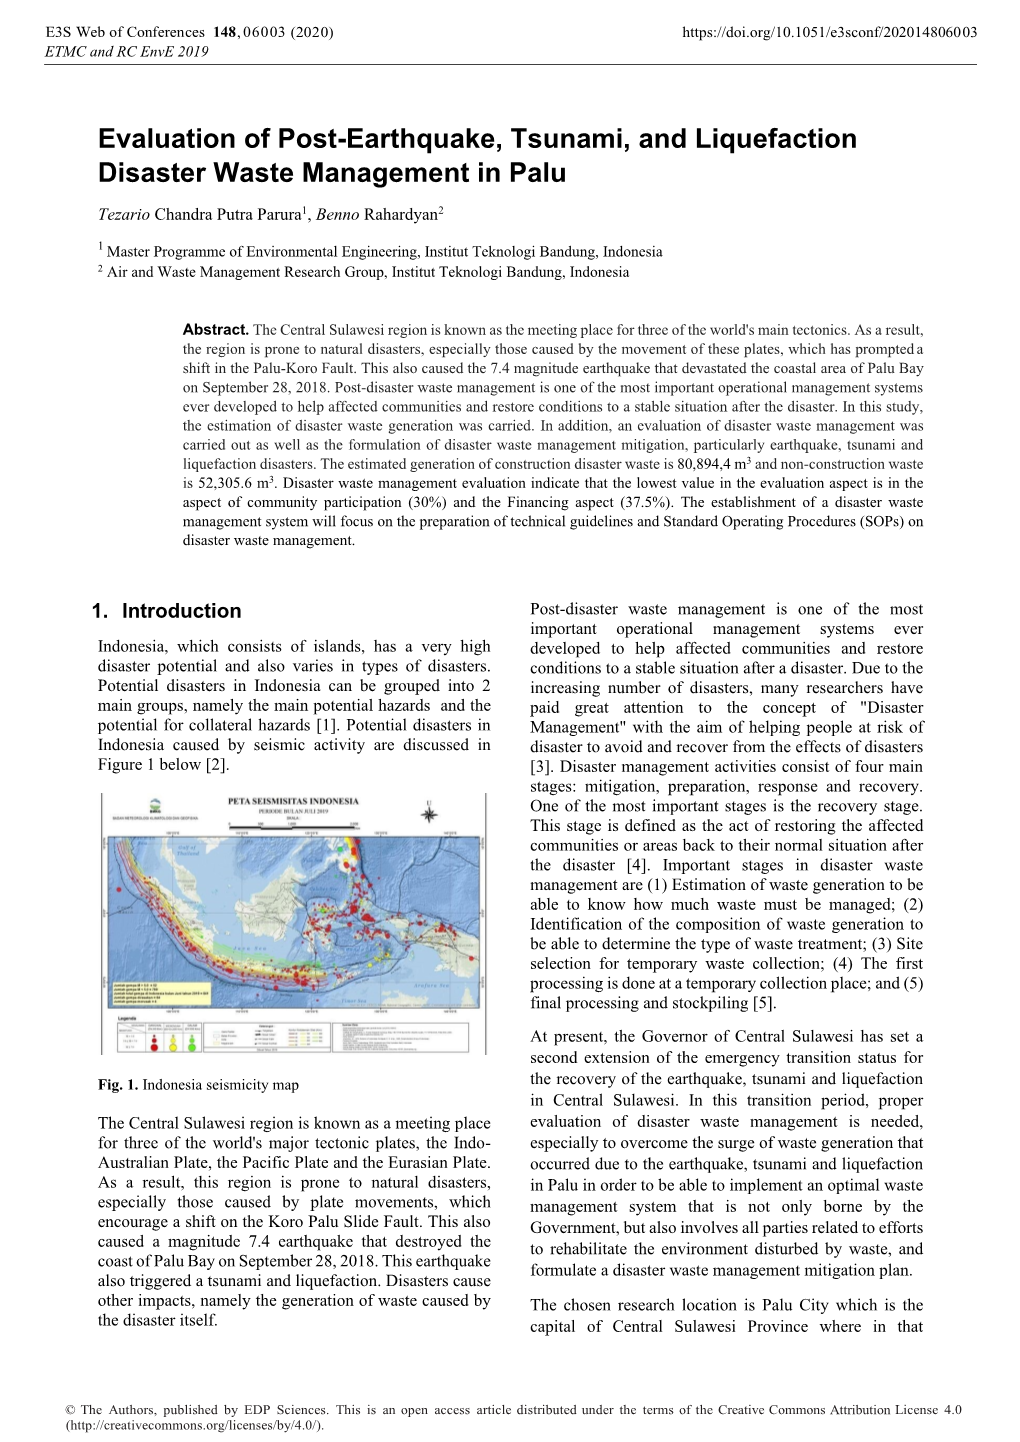 Evaluation of Post-Earthquake, Tsunami, and Liquefaction Disaster Waste Management in Palu